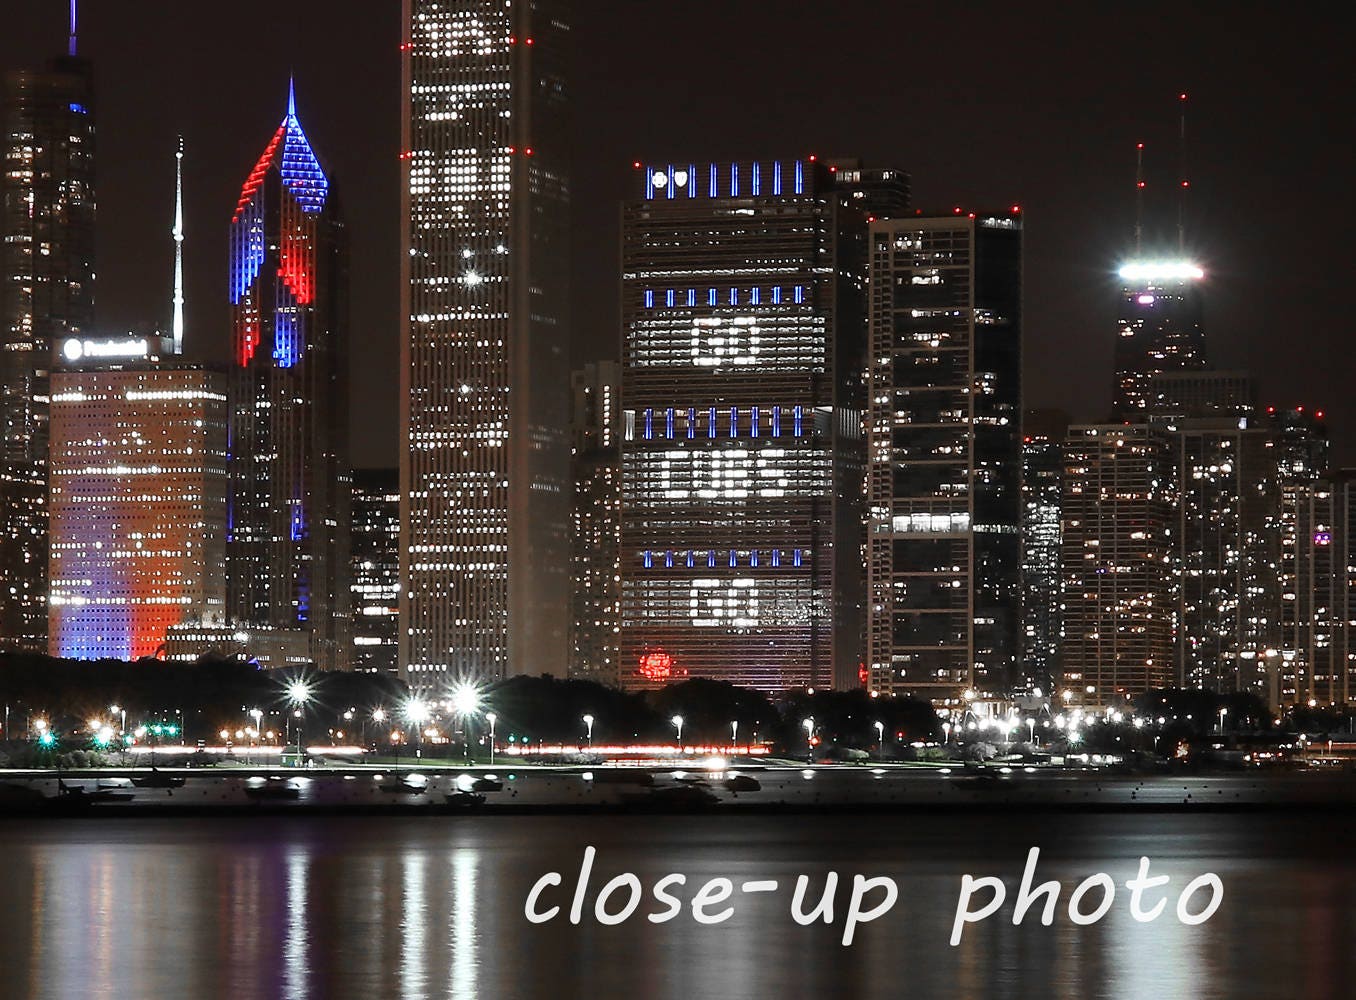 Chicago Cubs skyline photo print, World Series color picture, art photography, large paper or canvas wall decor 8x10 11x14 20x20 24x36 30x45